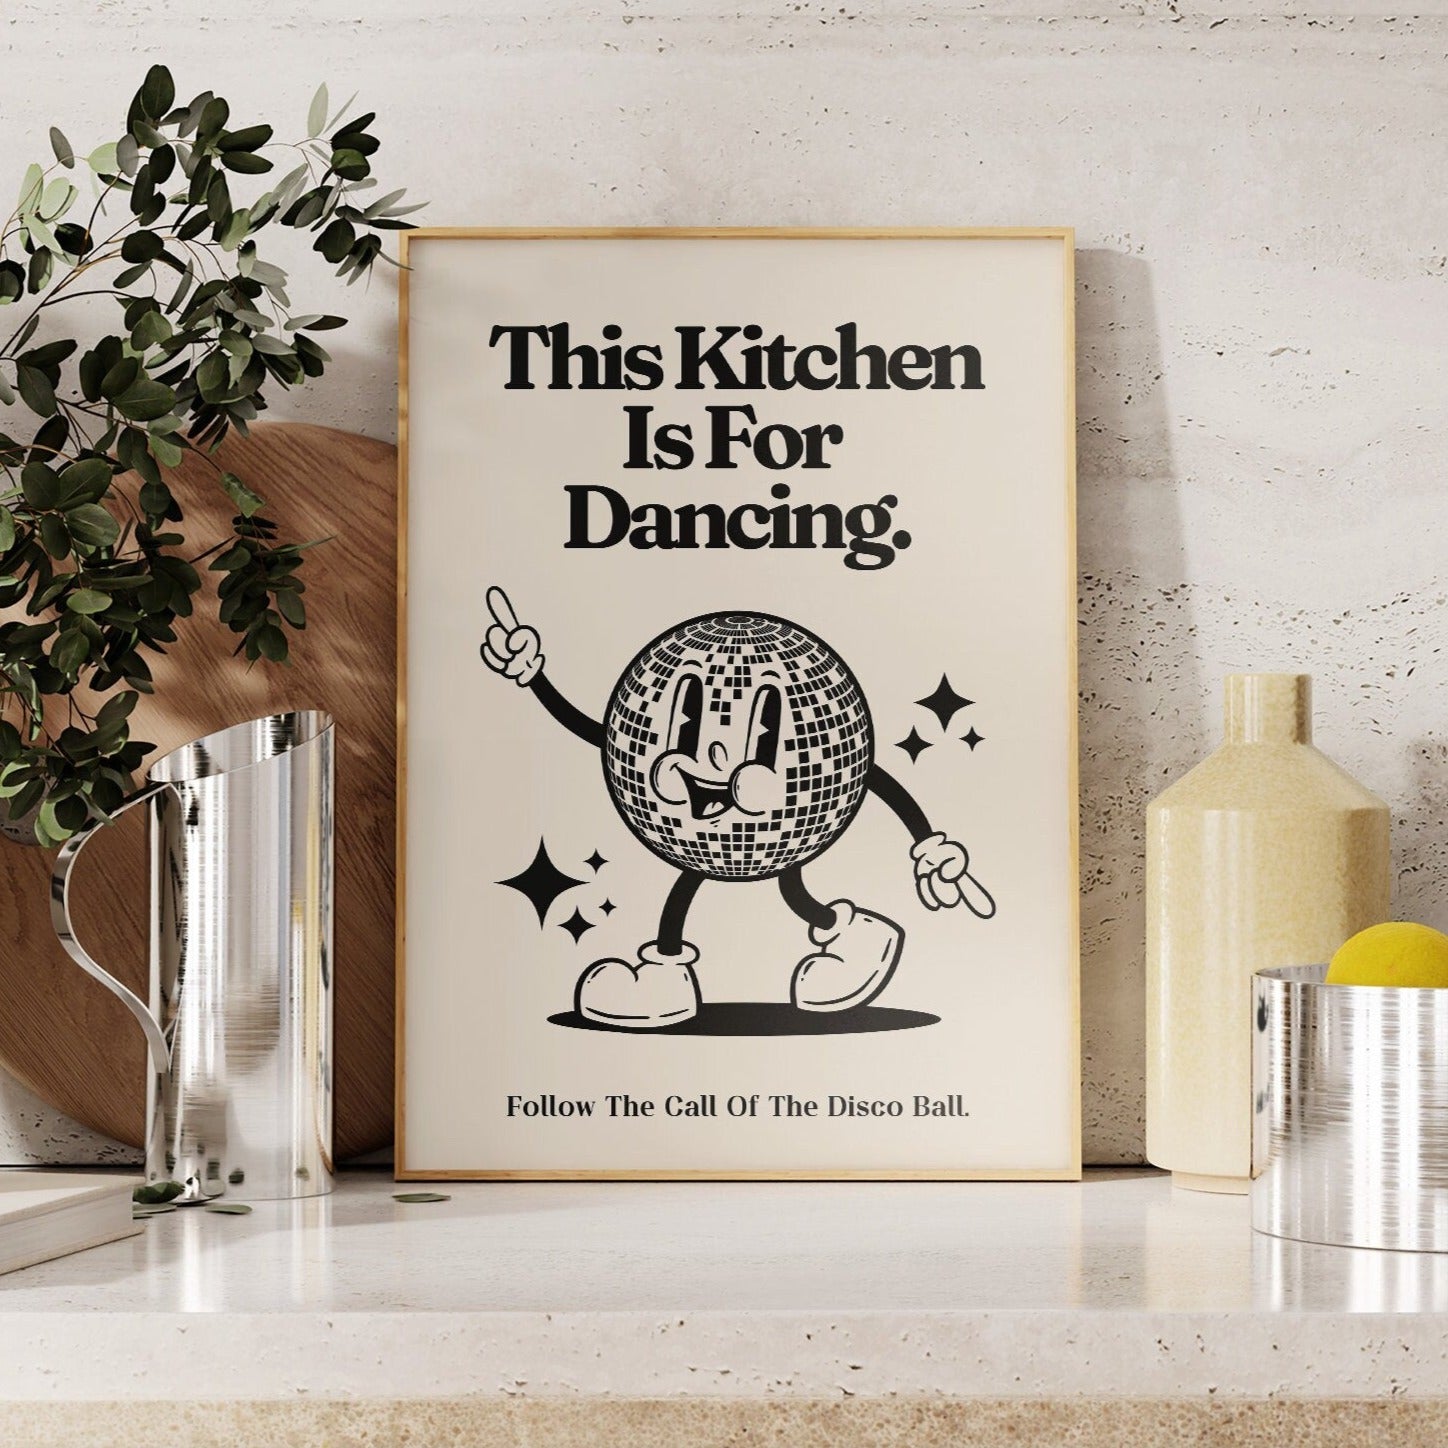 Retro Art PRINT, This Kitchen Is For Dancing Wall Art, Vintage Disco Poster, Retro Cartoon Character Wall Art, Beige and Black Art, UNFRAMED